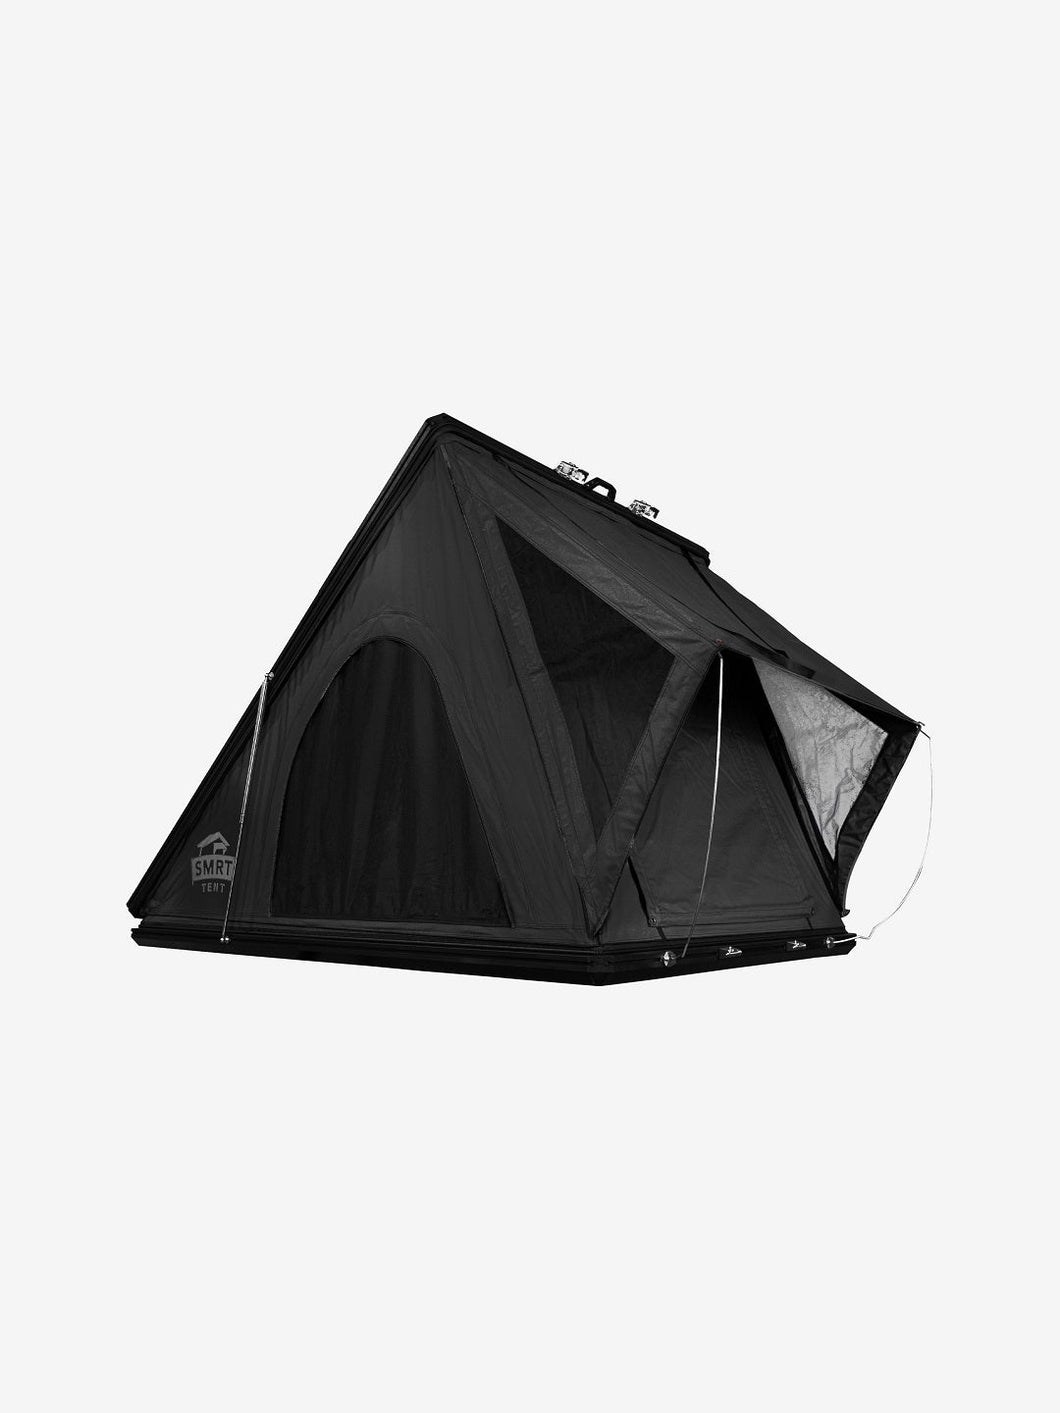 Pictured is a matte, all-black, completely set-up hard shell roof top tent. This is the Summit Suite, a large (2-person) hard shell roof top tent in Stealth Black. Perfect for any overland hard shell roof top tent camp adventure! Available for sale by SMRT Tent in Edmonton, Canada.